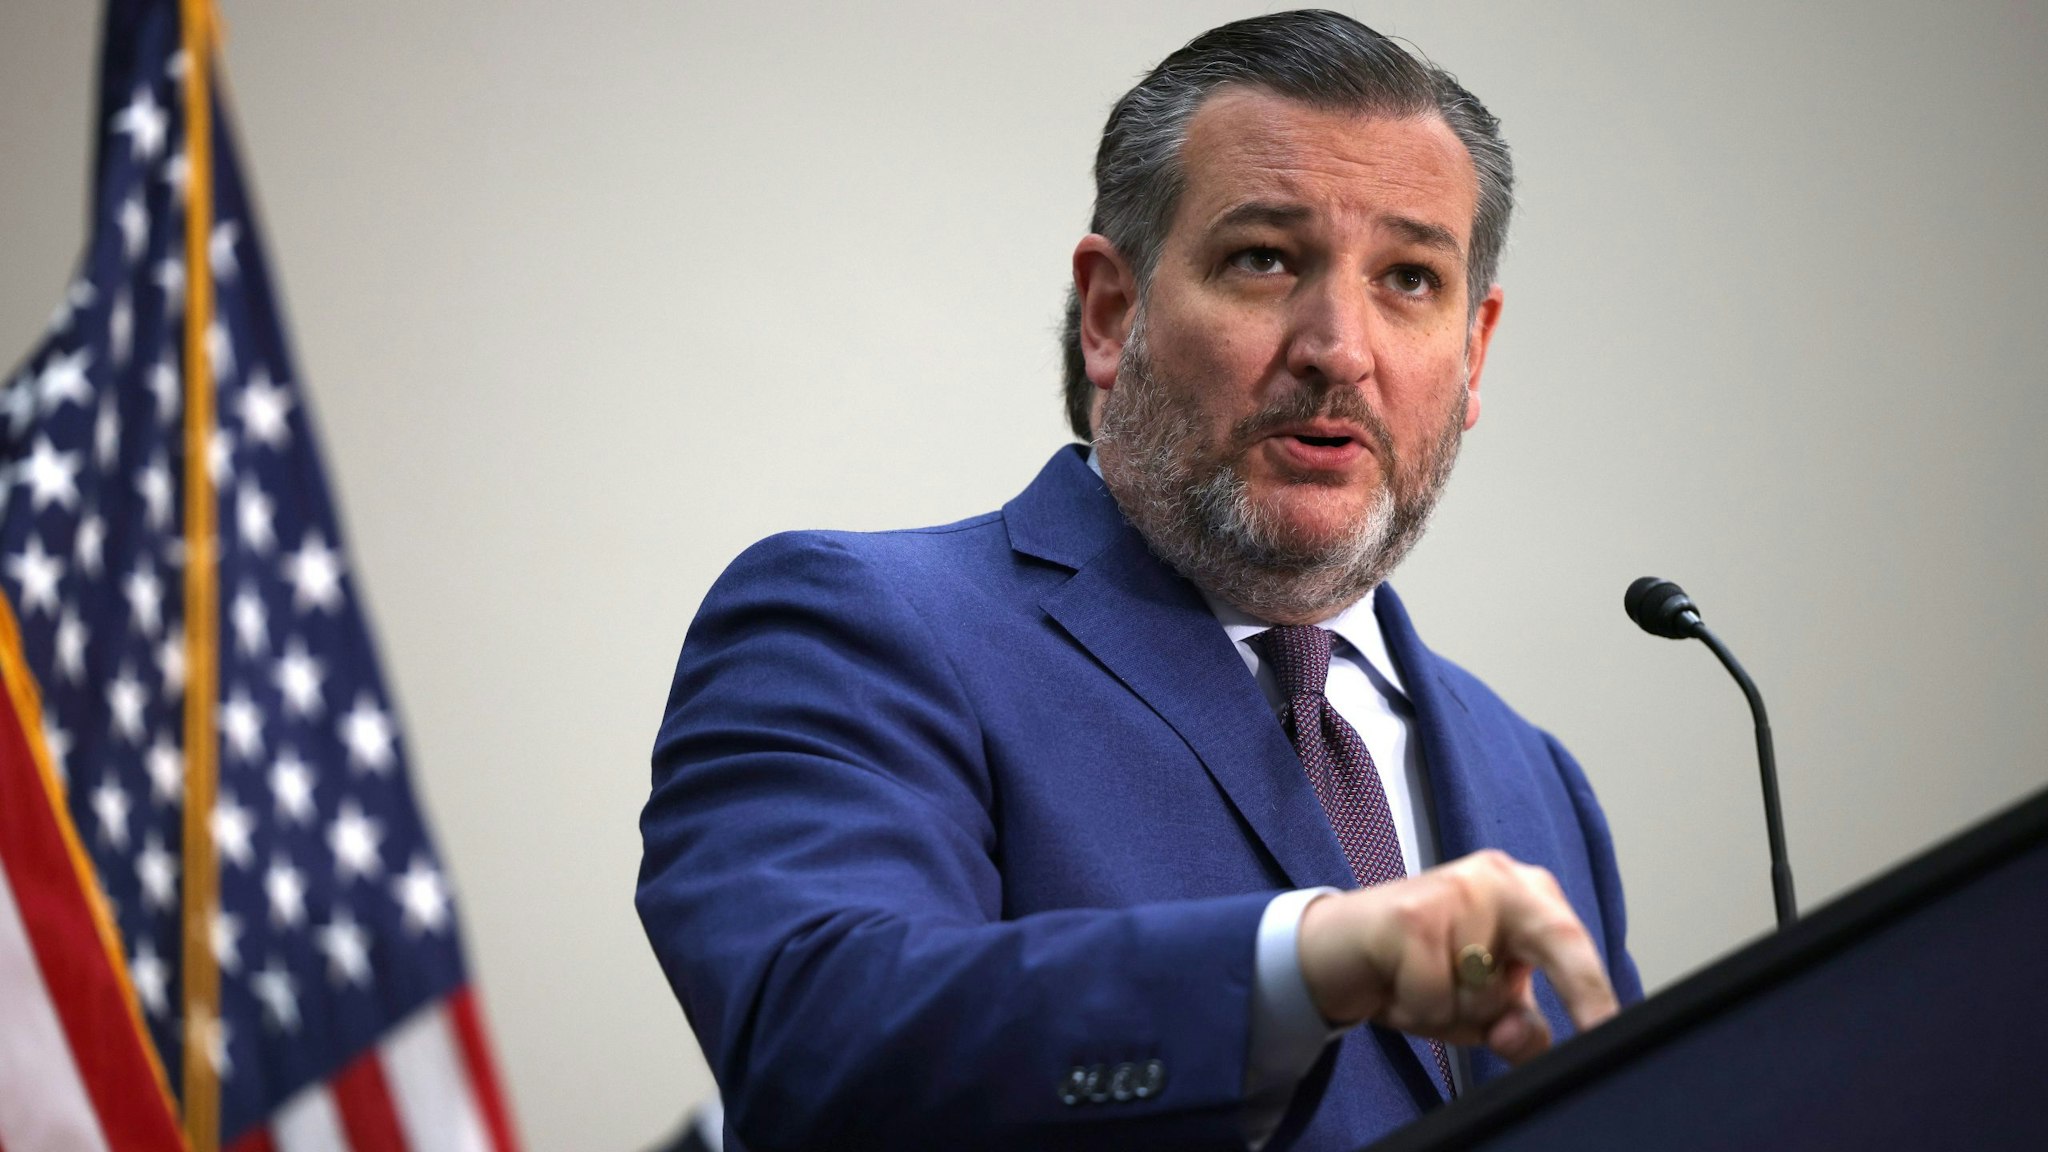 WASHINGTON, DC - MAY 12: Sen. Ted Cruz (R-TX) gestures as he speaks during a news conference on the U.S. Southern Border and President Joe Biden’s immigration policies, in the Hart Senate Office Building on May 12, 2021 in Washington, DC. Homeland Security Secretary Alejandro Mayorkas will testify on May 13 before the Senate Homeland Security and Governmental Affairs Committee on the DHS treatment of unaccompanied minors at the U.S. Southern border.